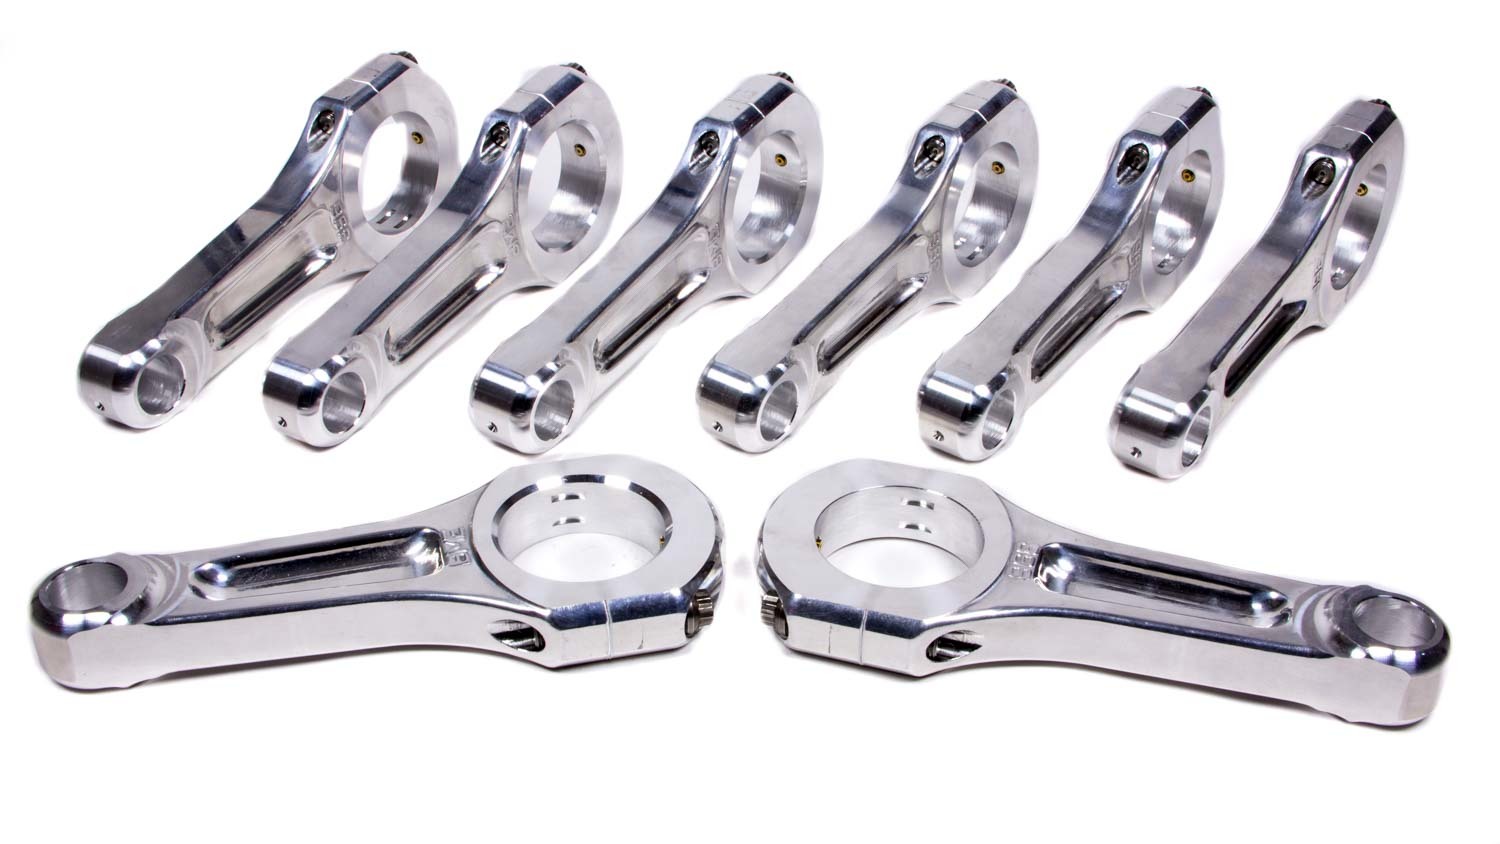 Bill Miller 396565 Connecting Rod, I Beam, 6.700 in Long, Bushed, 7/16 in Cap Screws, Forged Aluminum, Big Block Chevy, Set of 8